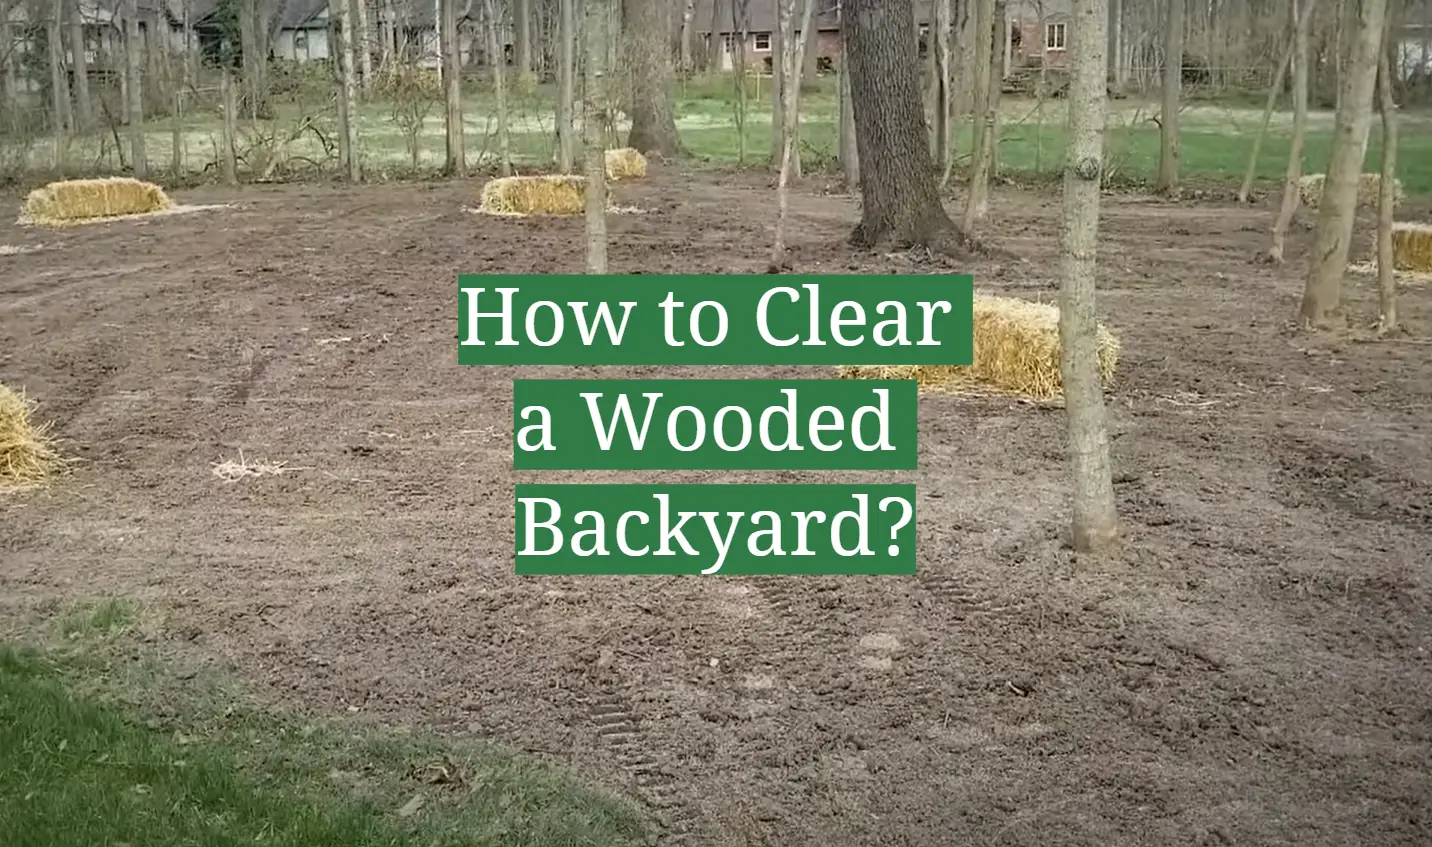 How to Clear a Wooded Backyard?